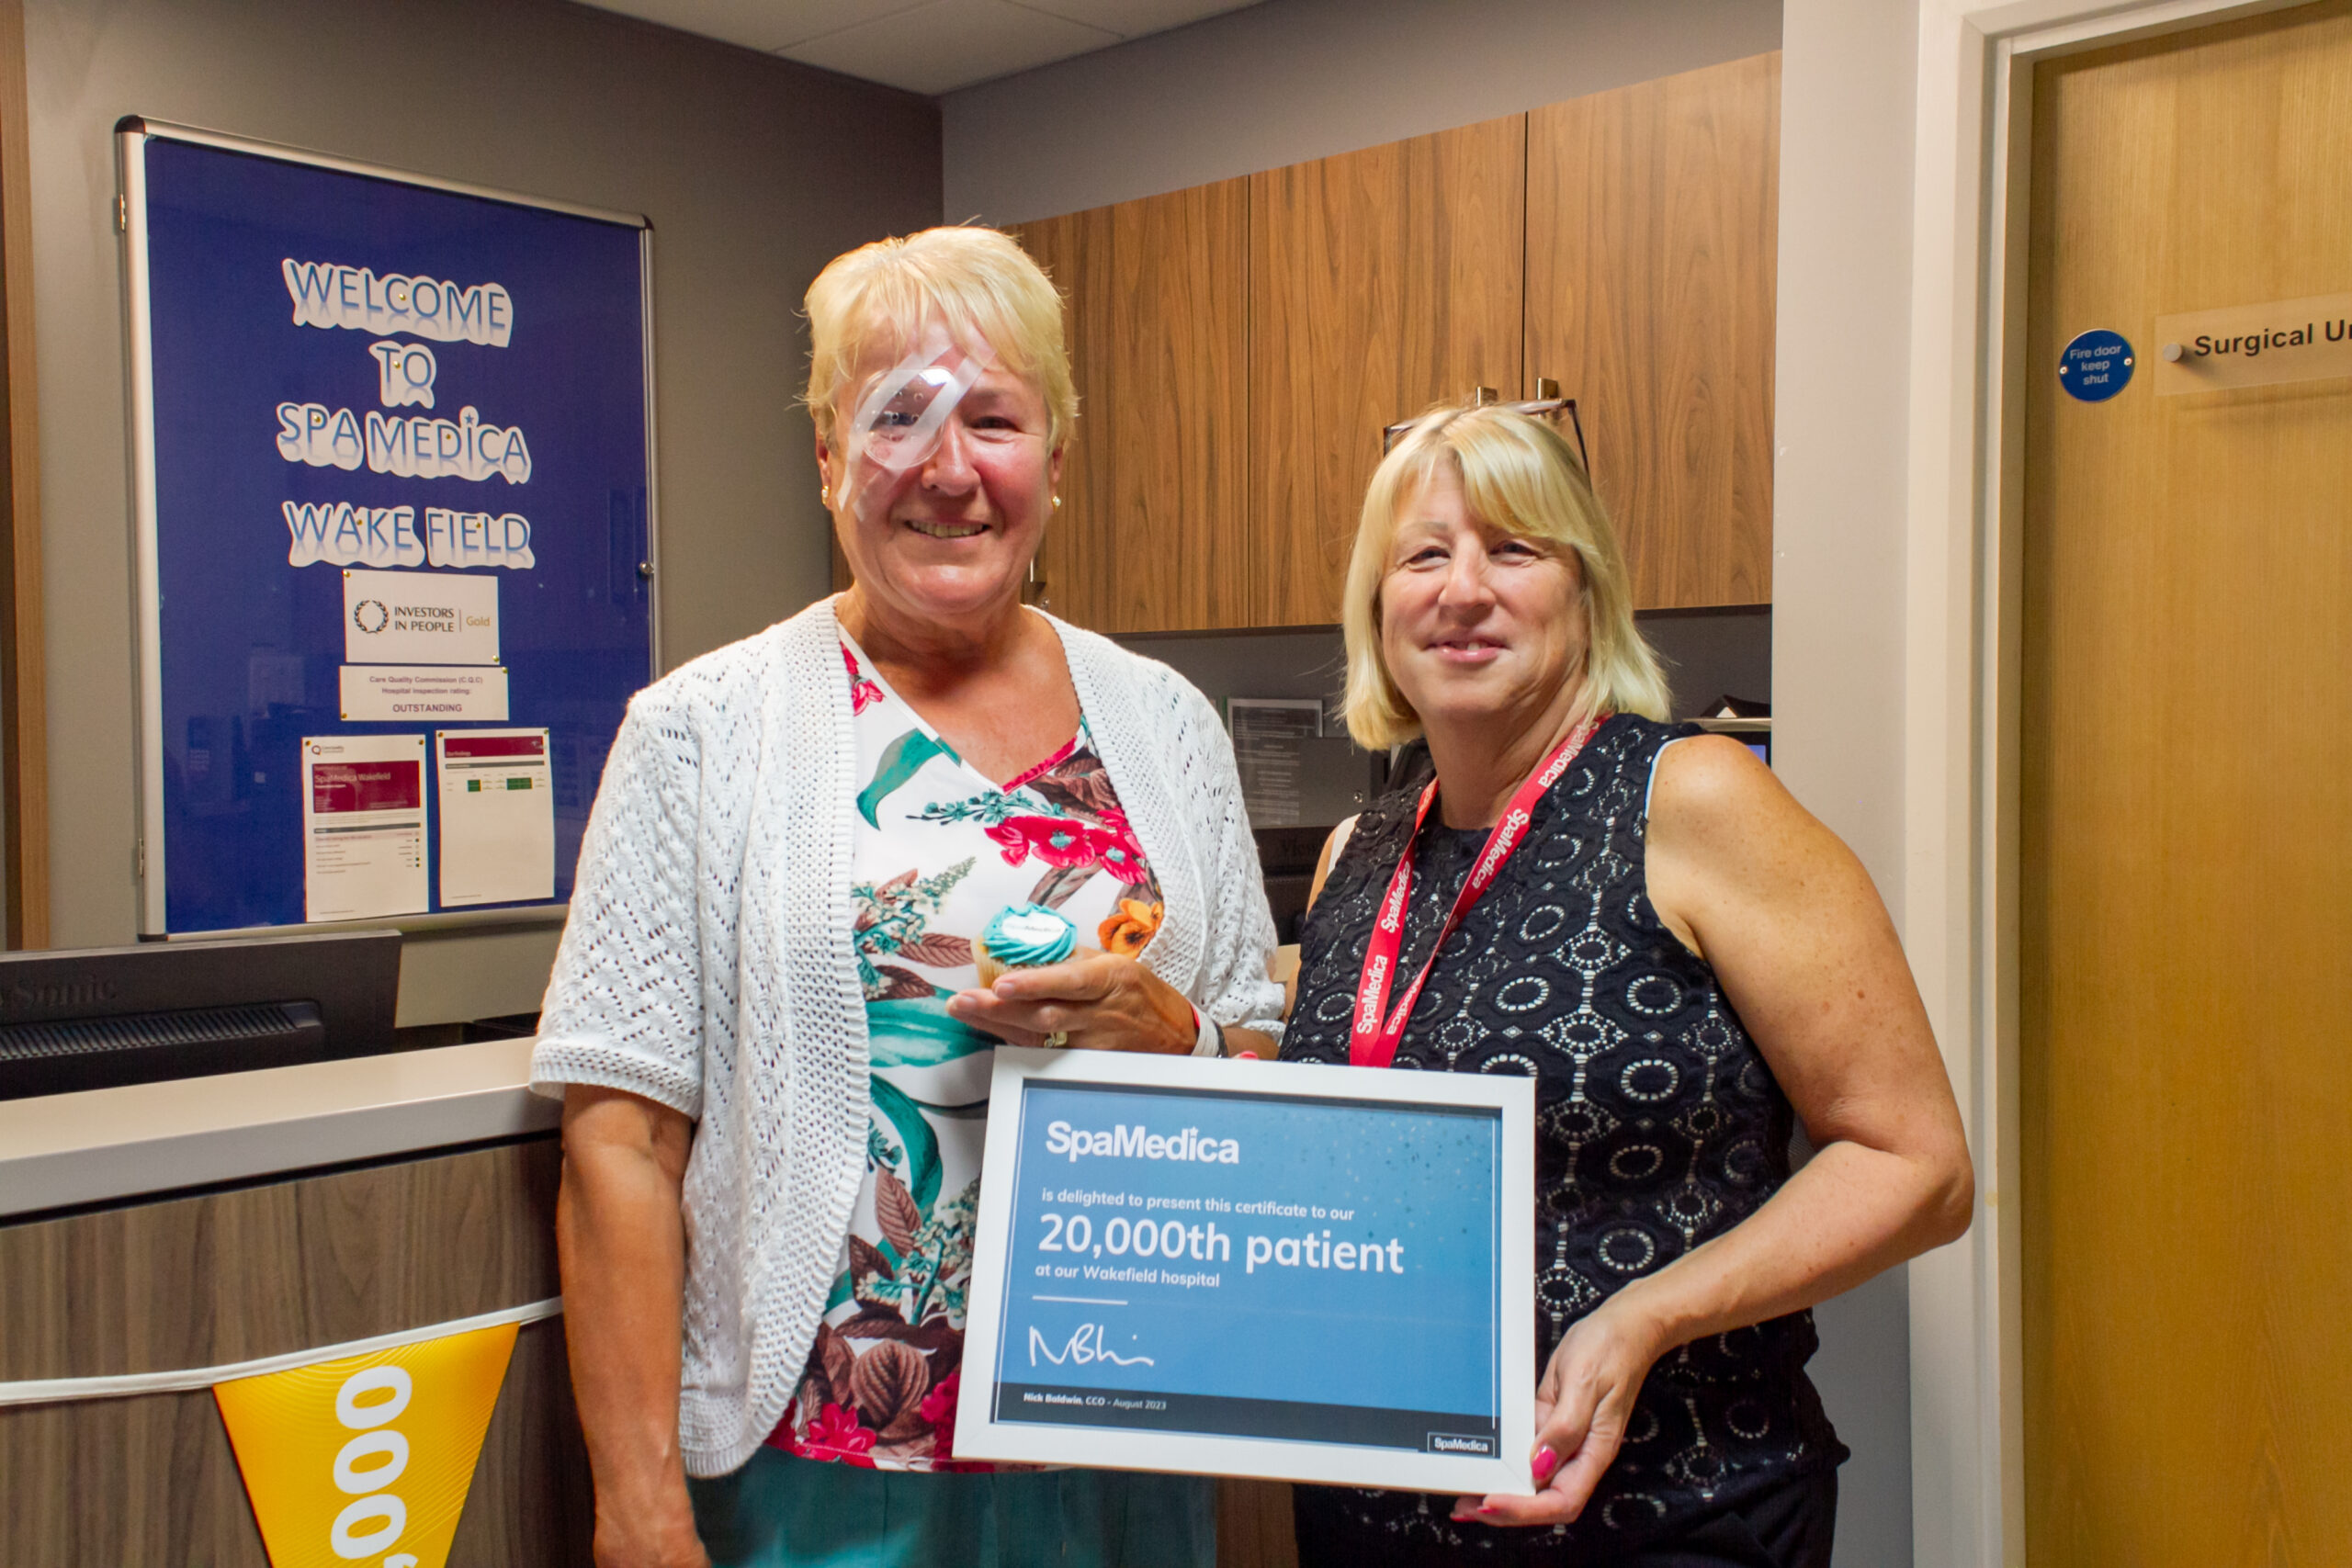 Female patient pictured with hospital manager holding a certificate to celebrate the hospital's 20,000th patient milestone